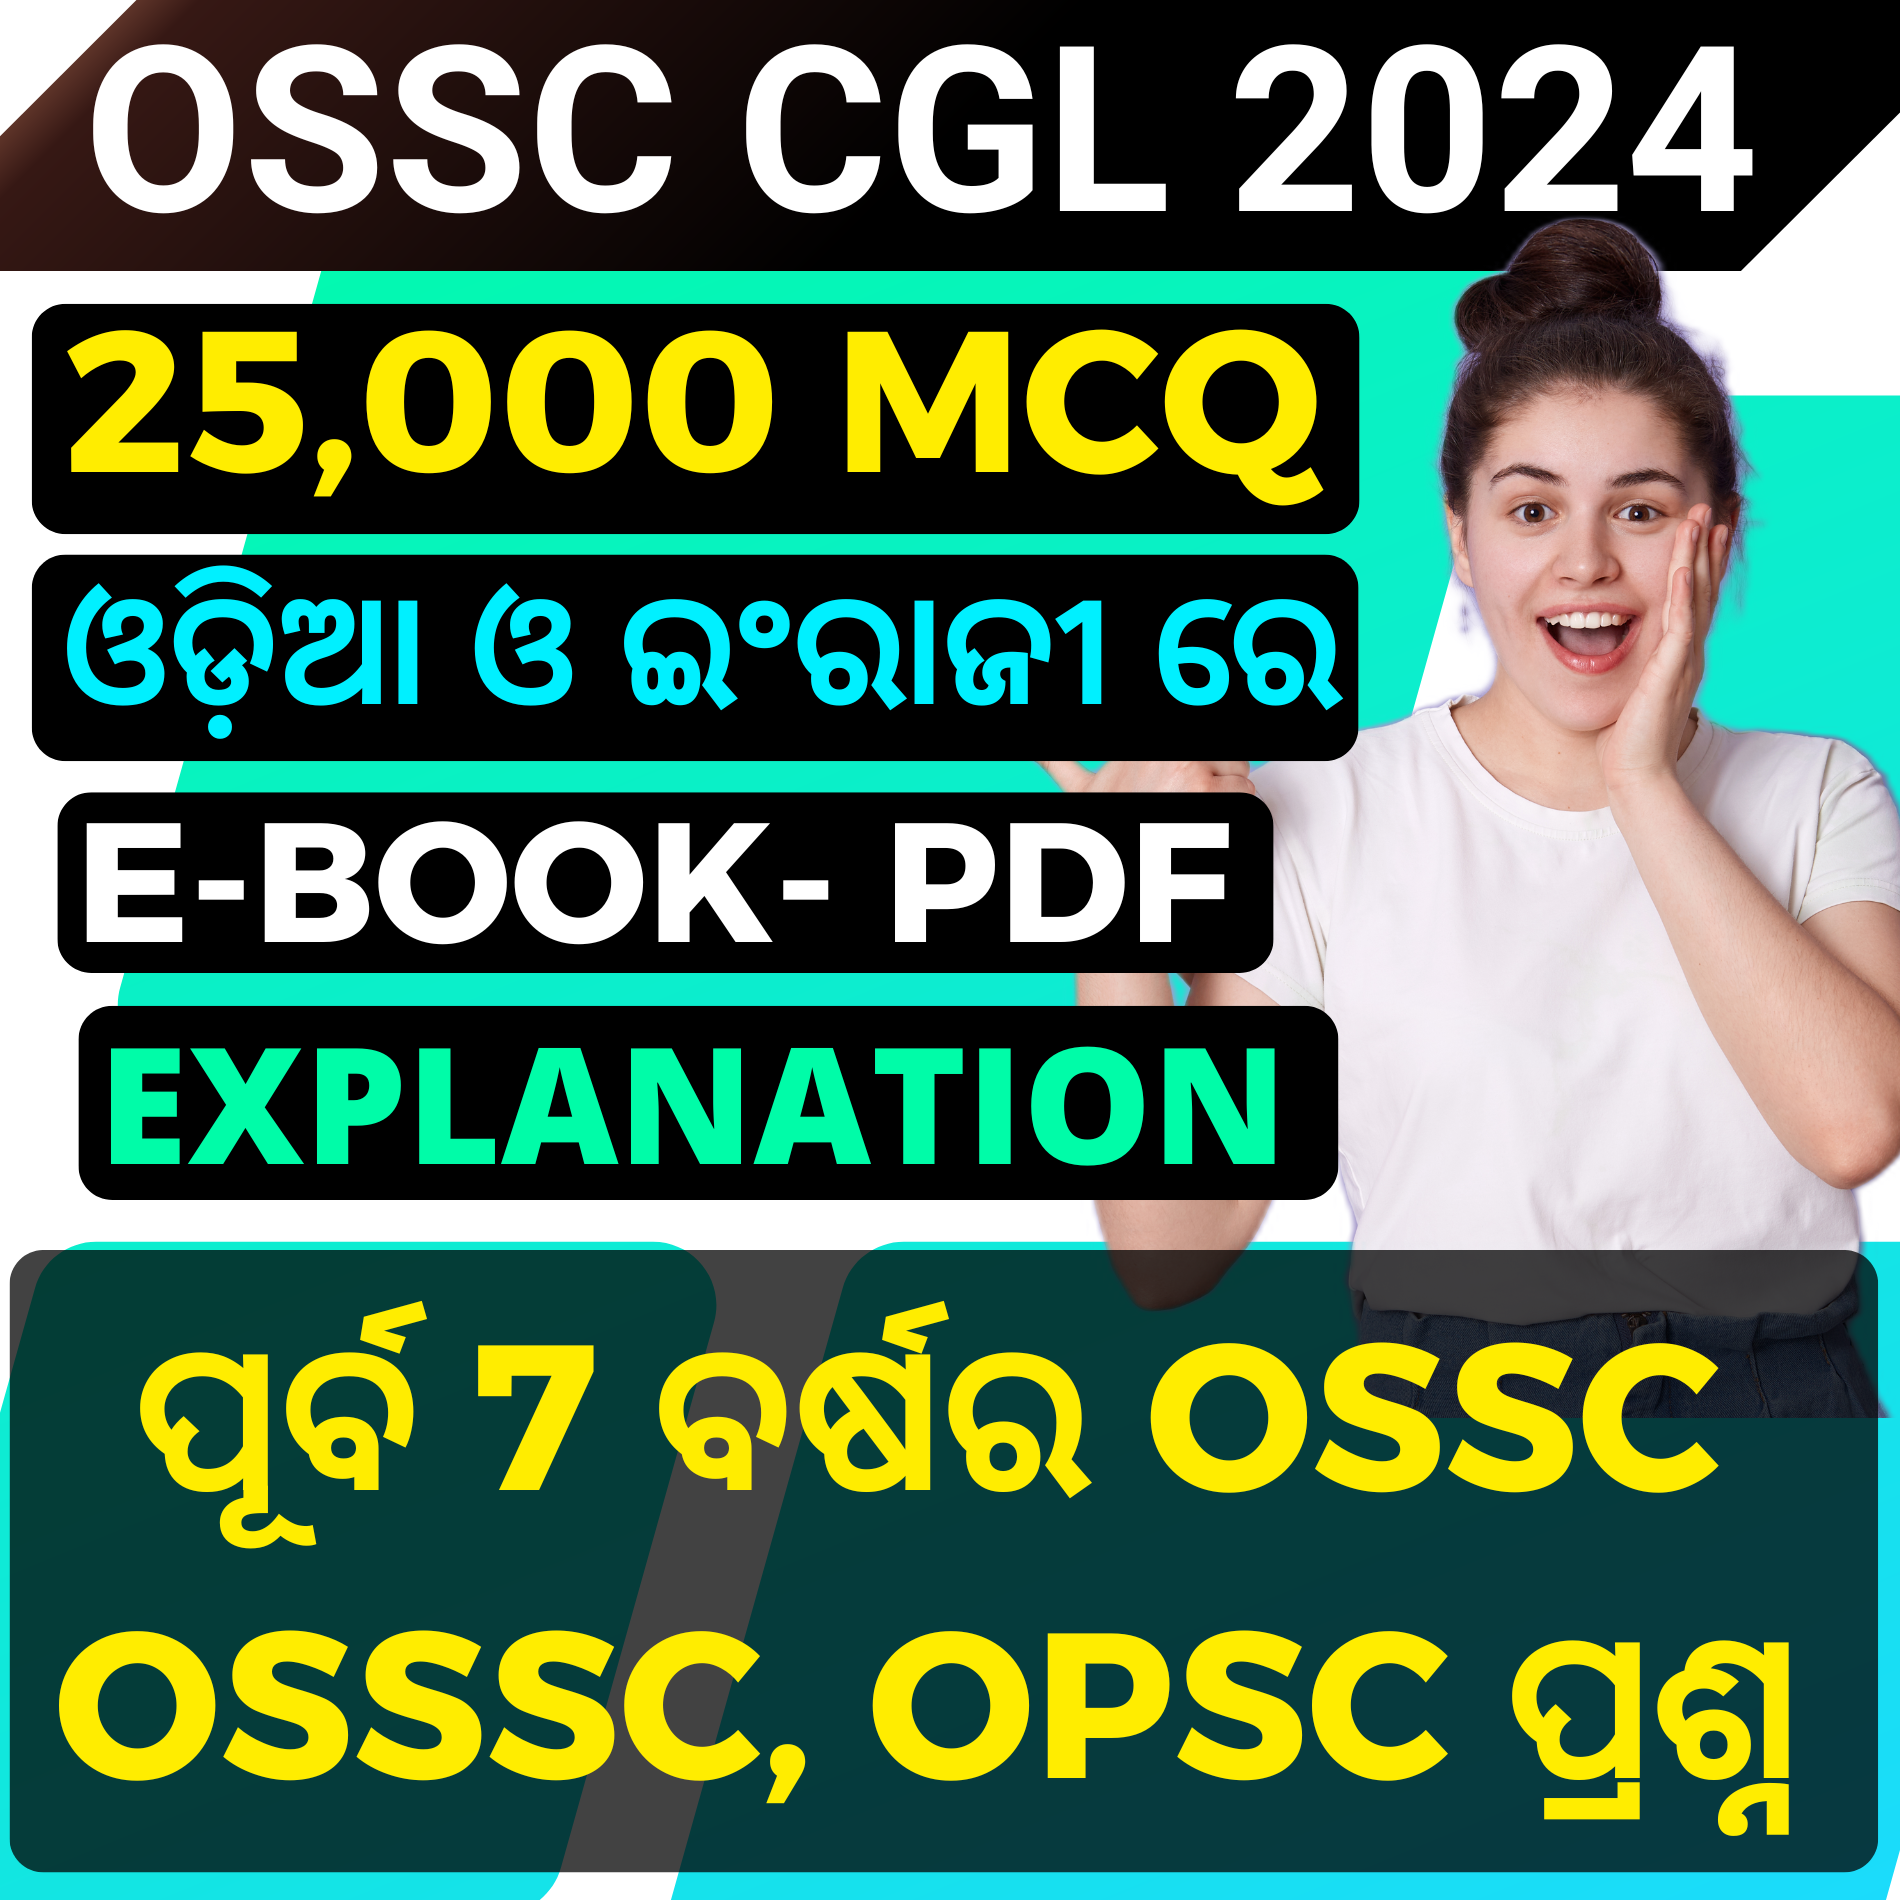 S- OSSC CGL Exam 2024 - 25,000+ MCQ (Preliminary &amp; Mains Exam Syllabus Wise, Chapter Wise &amp; Subject Wise With Explanation ) !! CHAPTER WISE LAST 5 Years OSSC, OSSSC, OPSC ALL QUESTIONS &amp; ANSWER